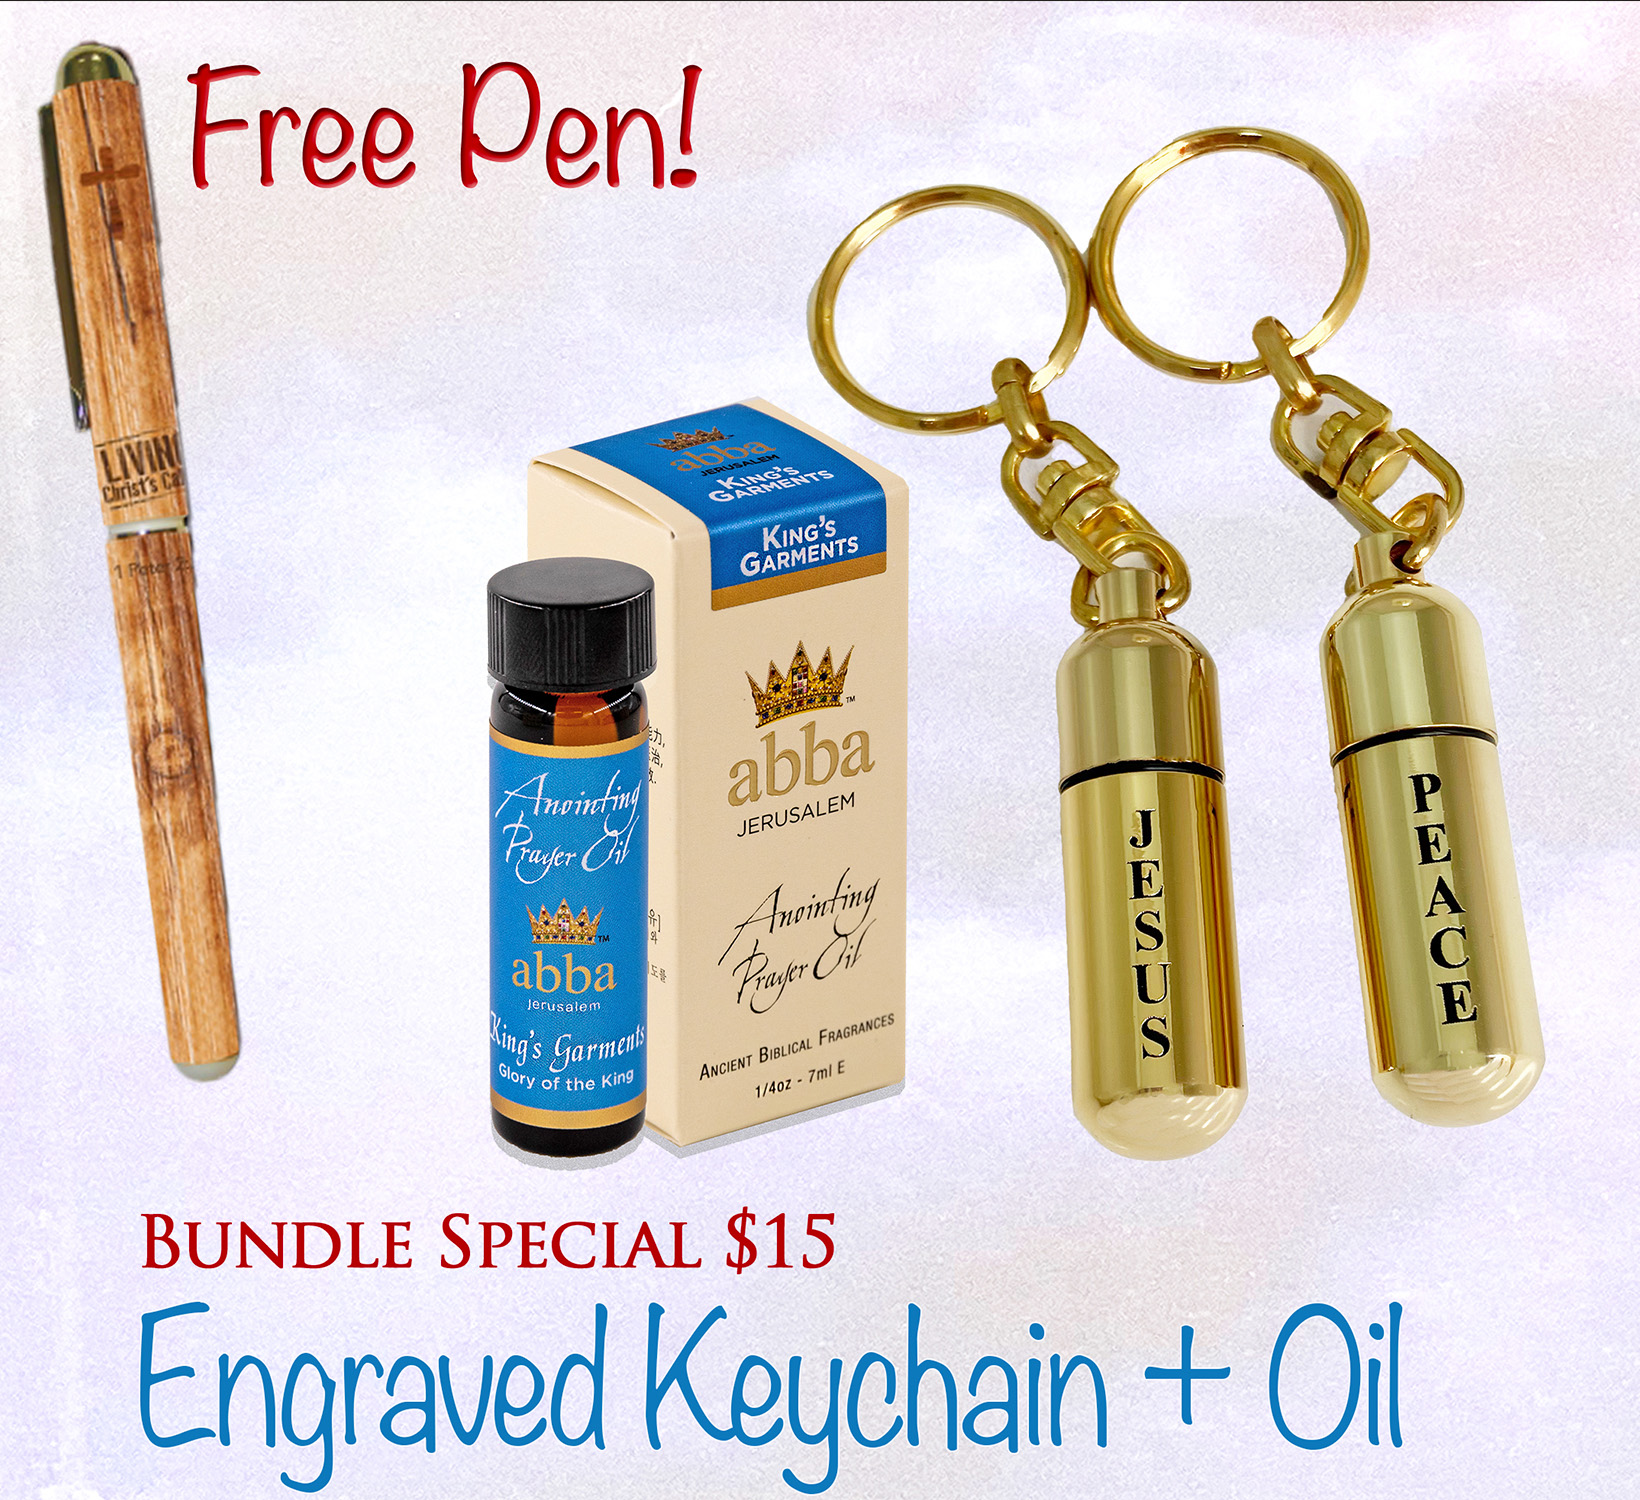 FREE PEN WITH KING'S GARMENTS OIL & KEYCHAIN